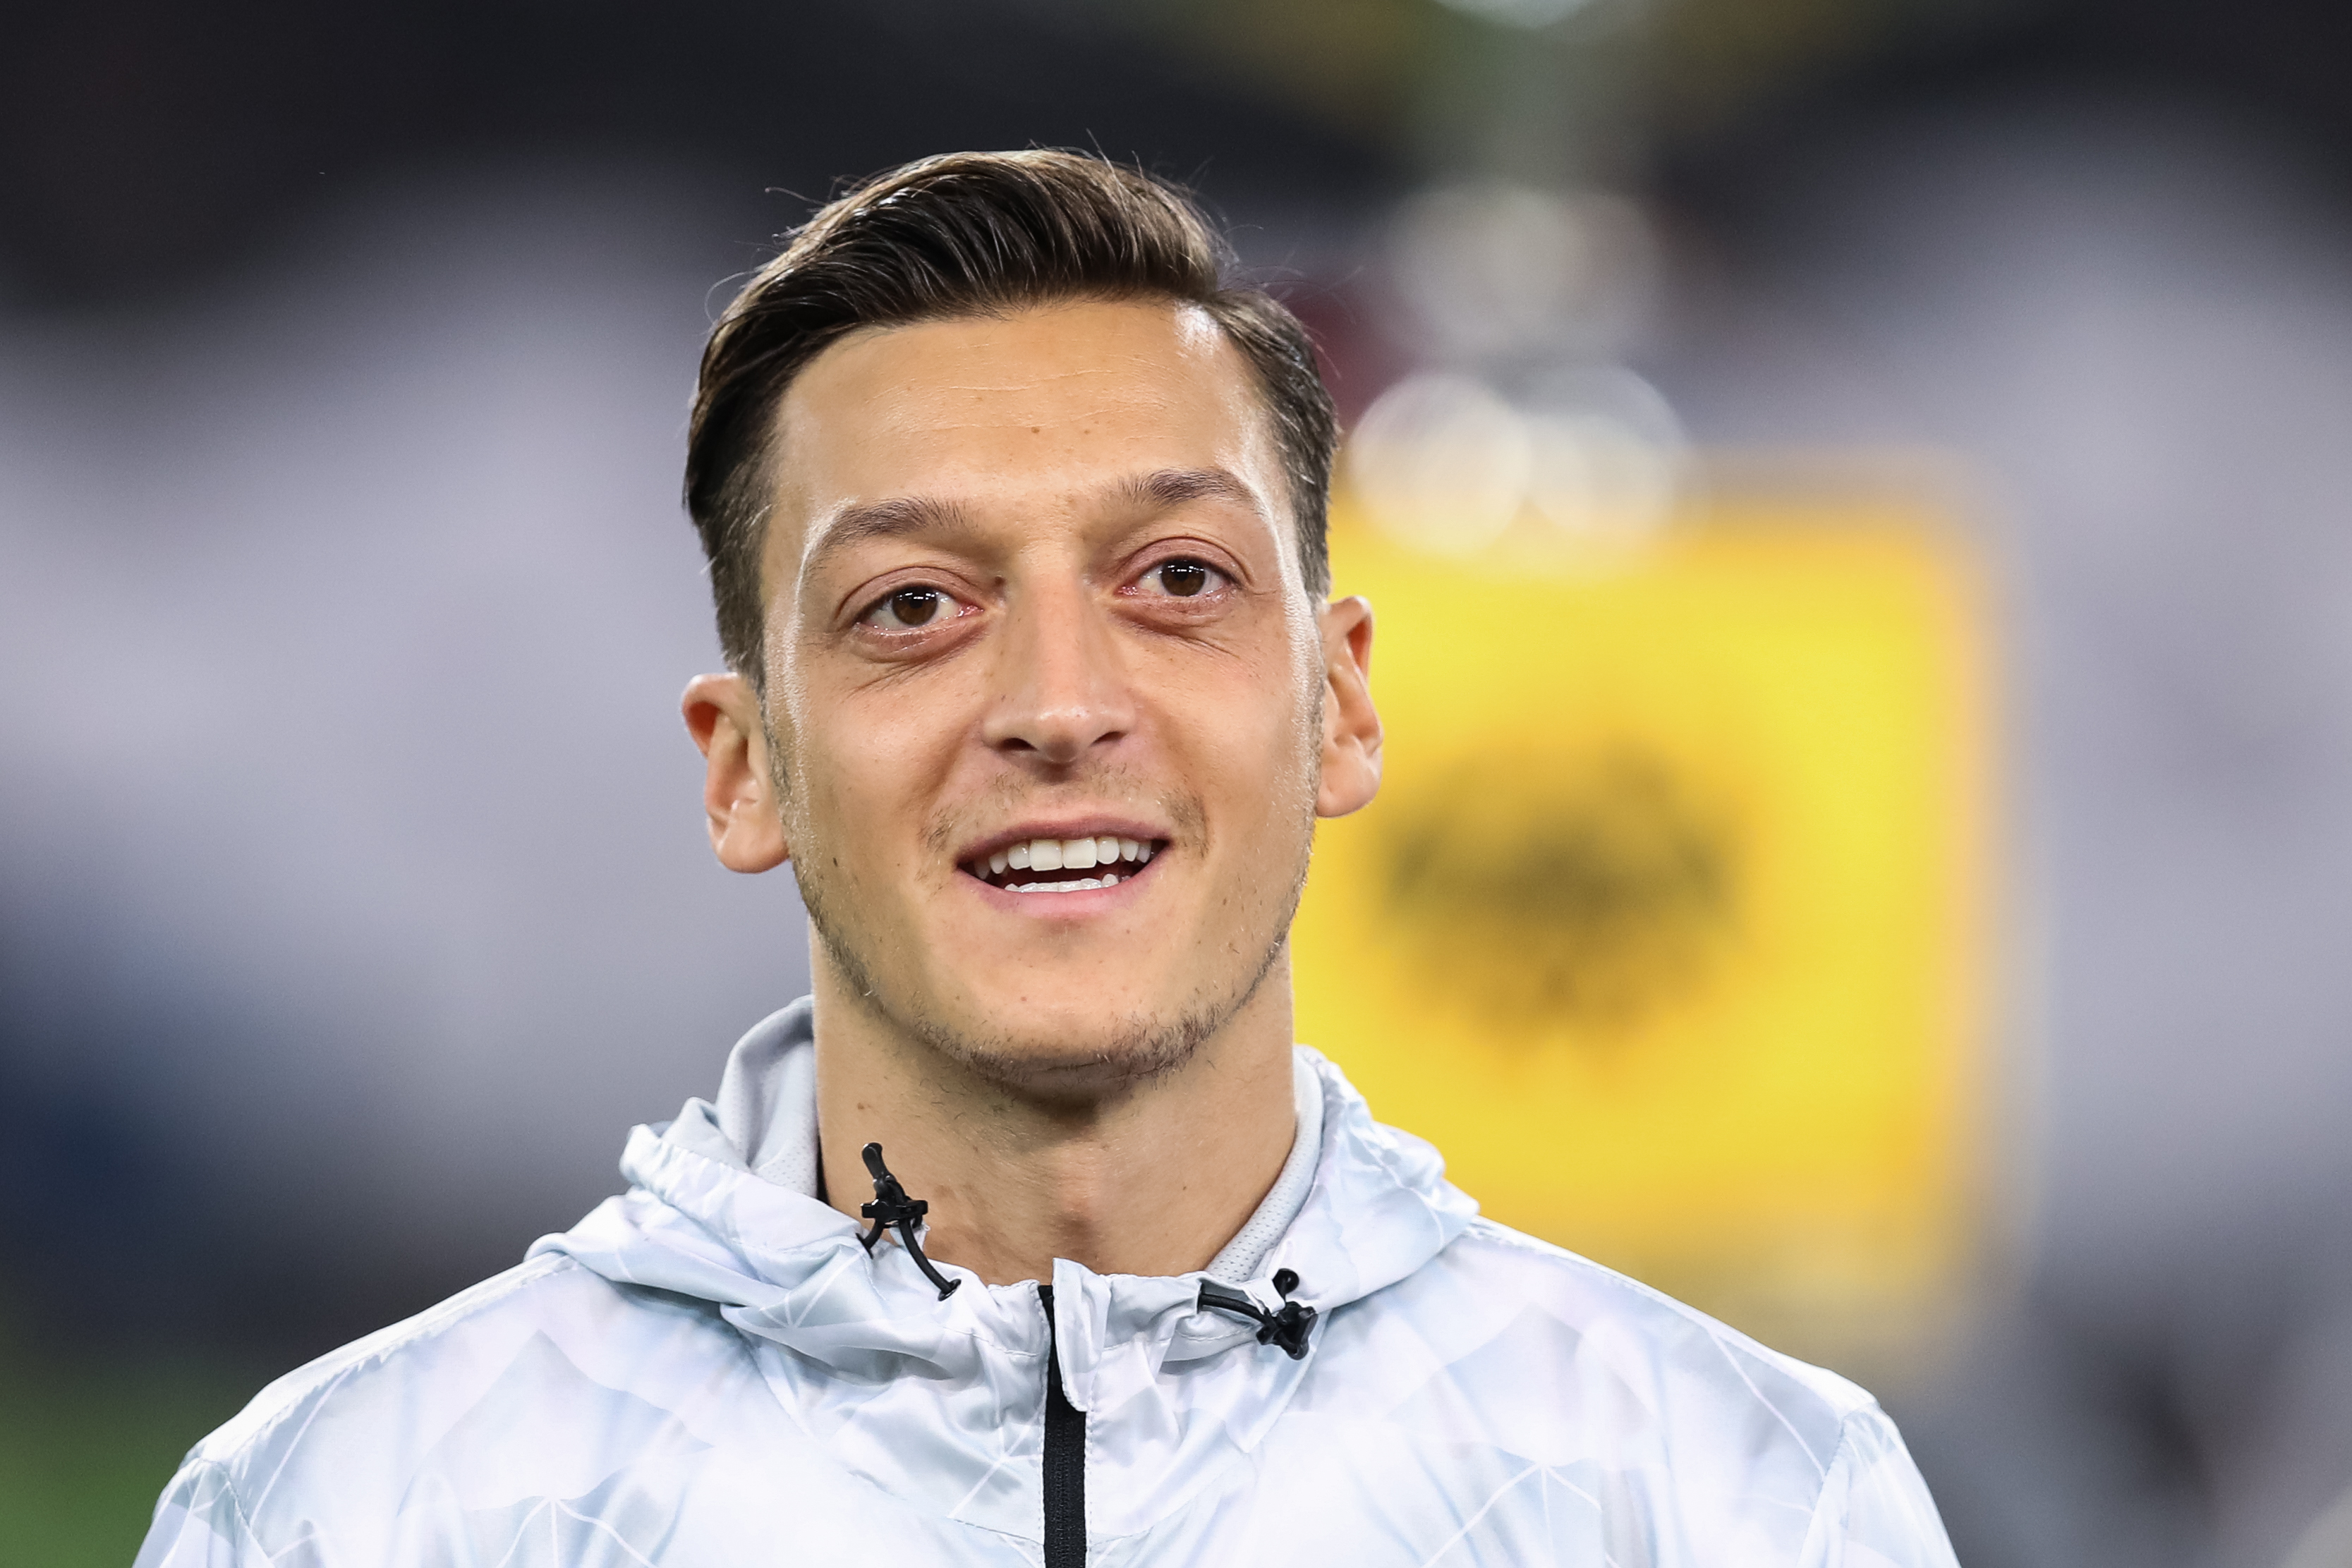 Arsenal Midfielder Mesut Ozil’s Agent: “A Move To Juventus, AC Milan Or Inter? Maybe One Day, Why Not?”